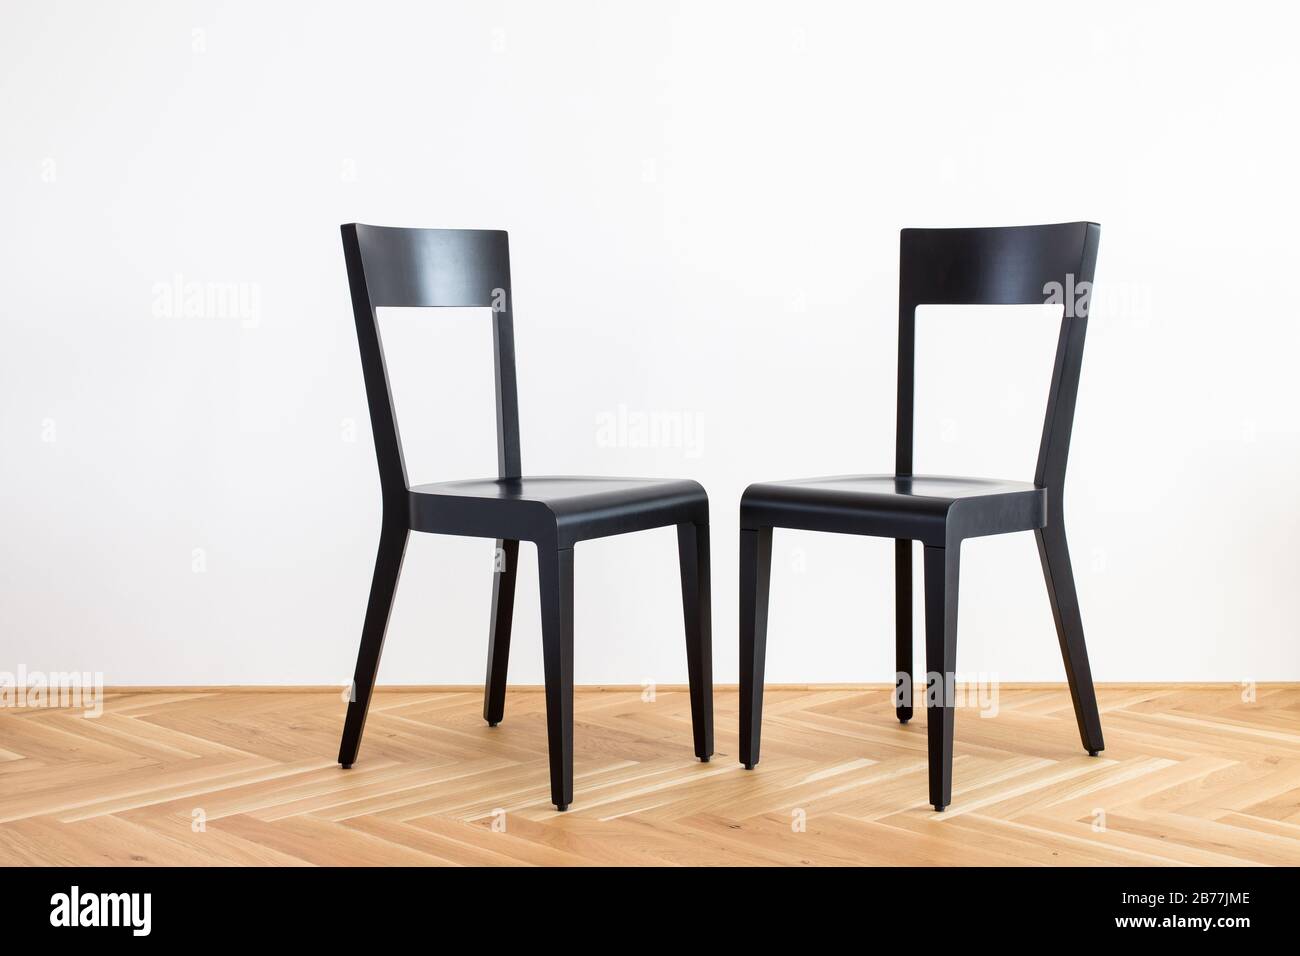 modern simplistic black chairs on a wooden flor in front of white background Stock Photo